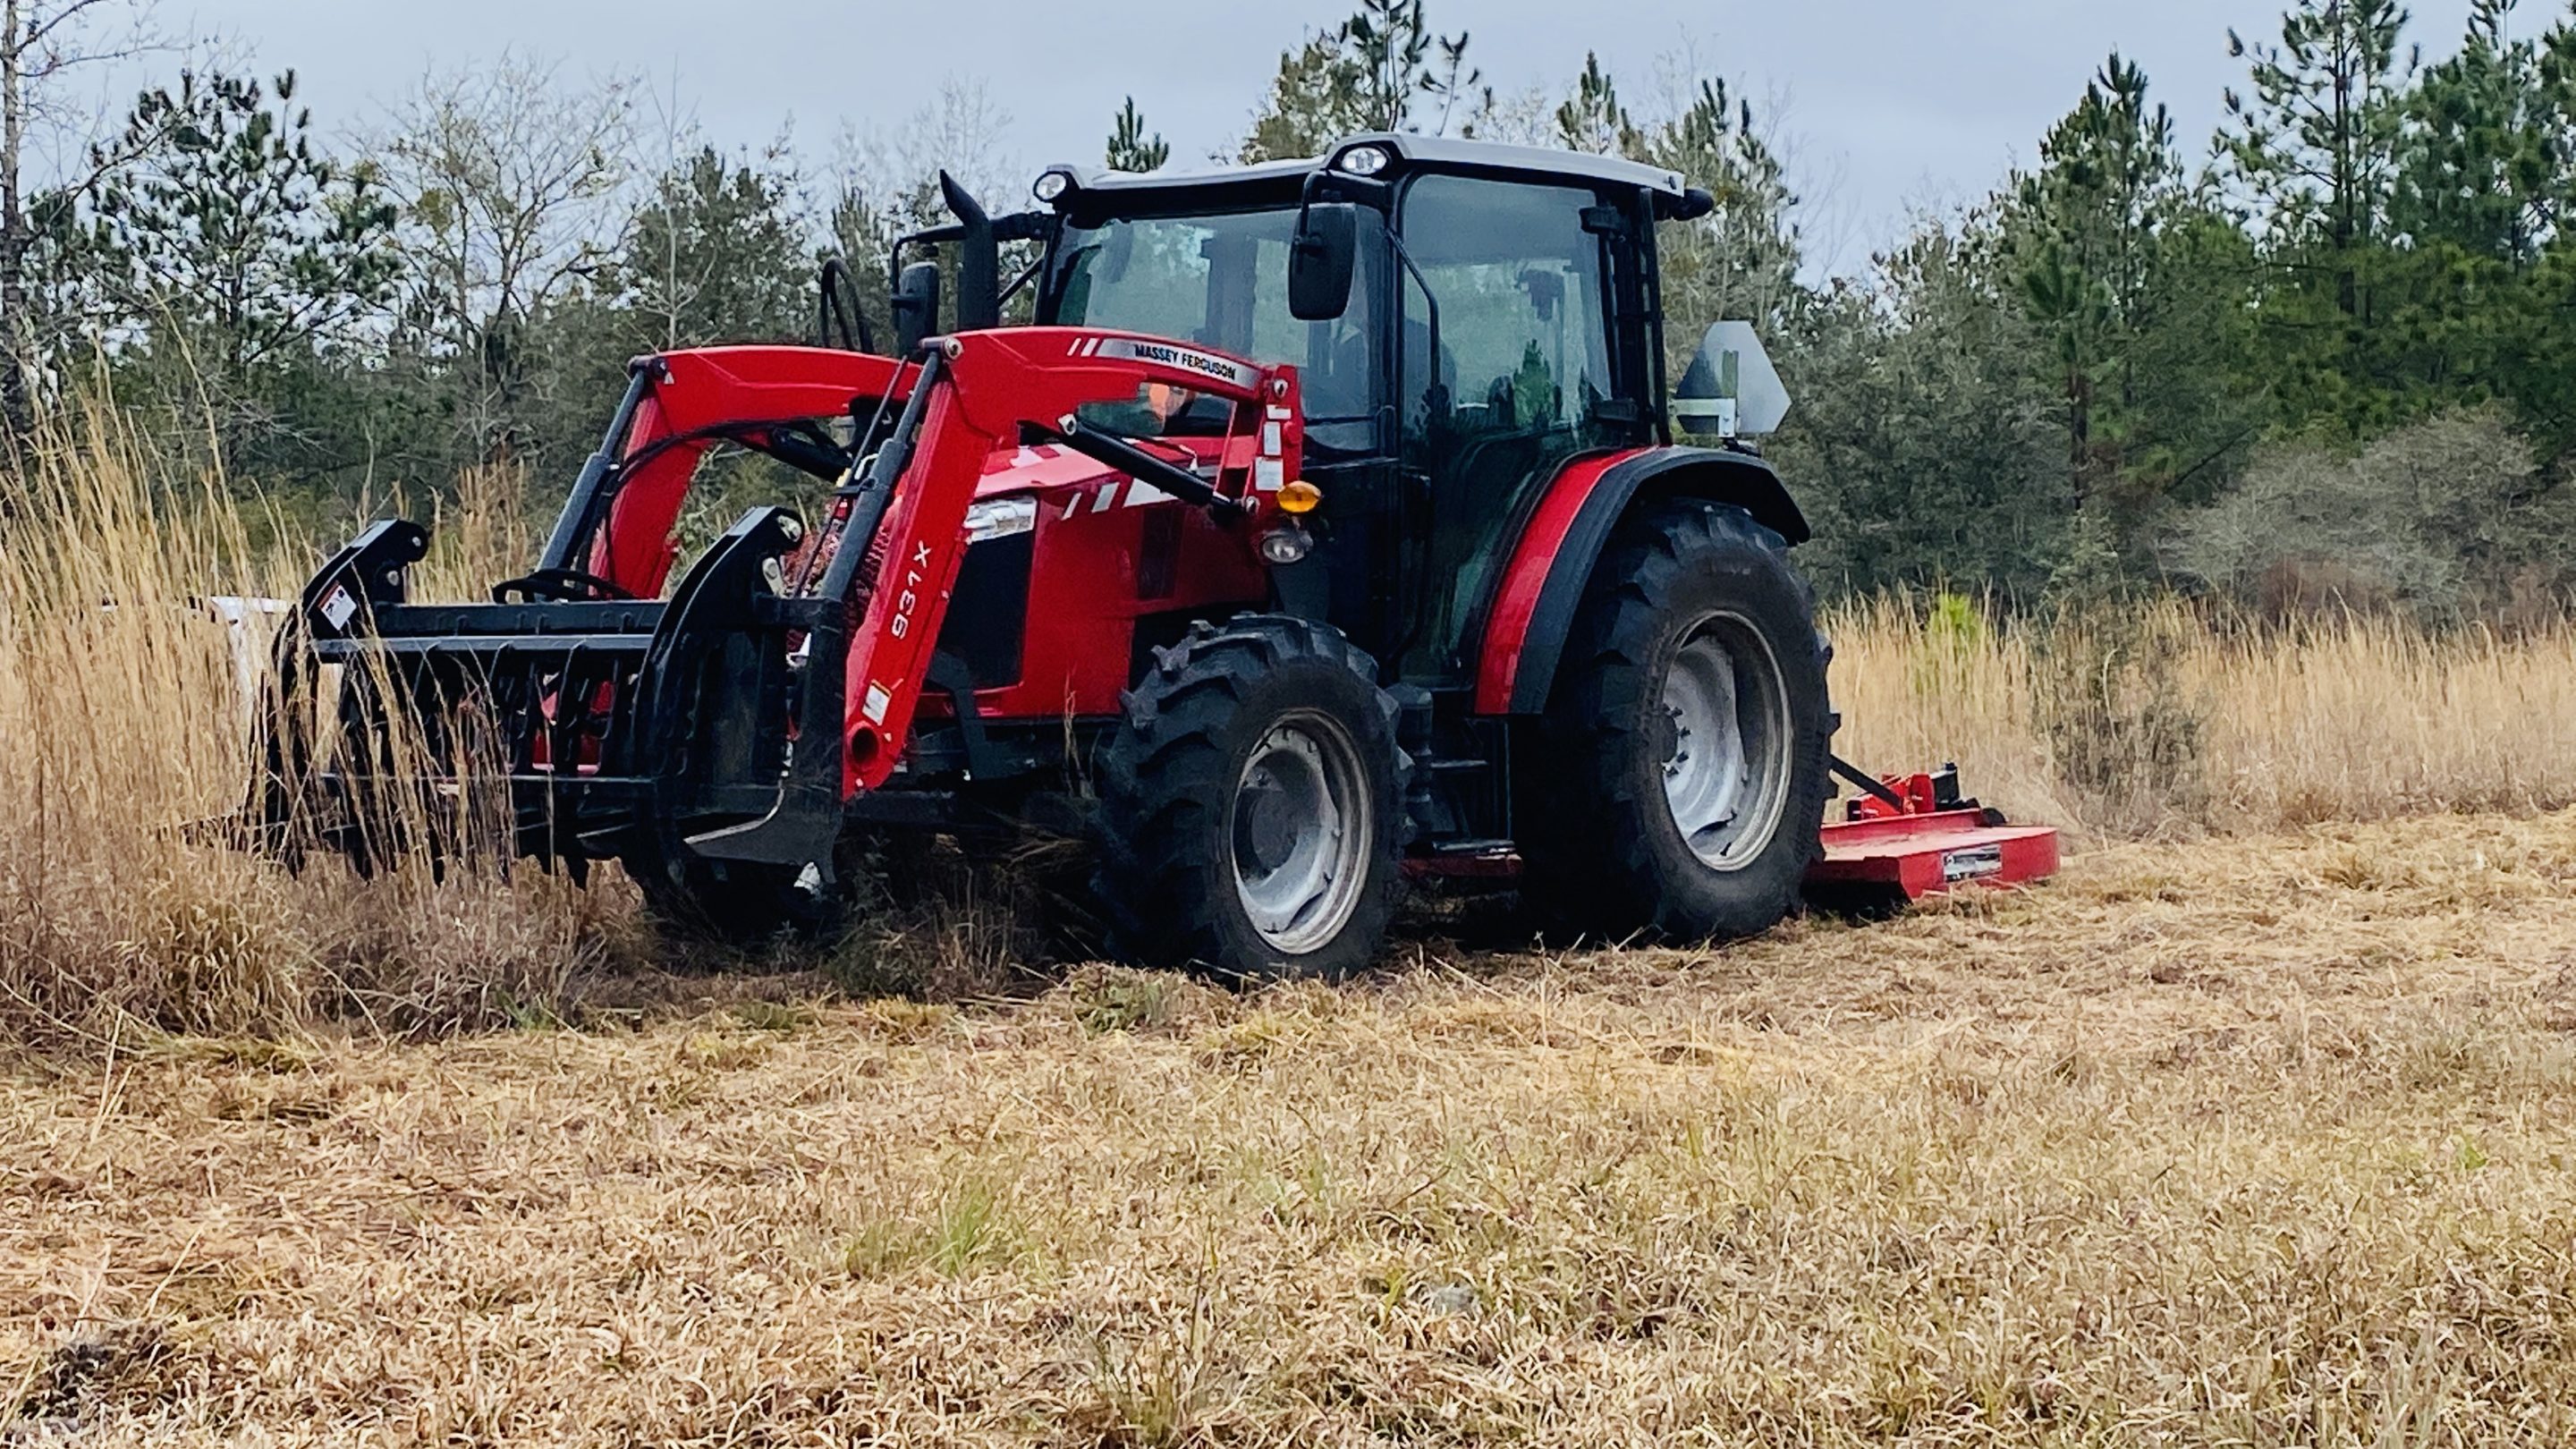 Tractor Grass Cutting